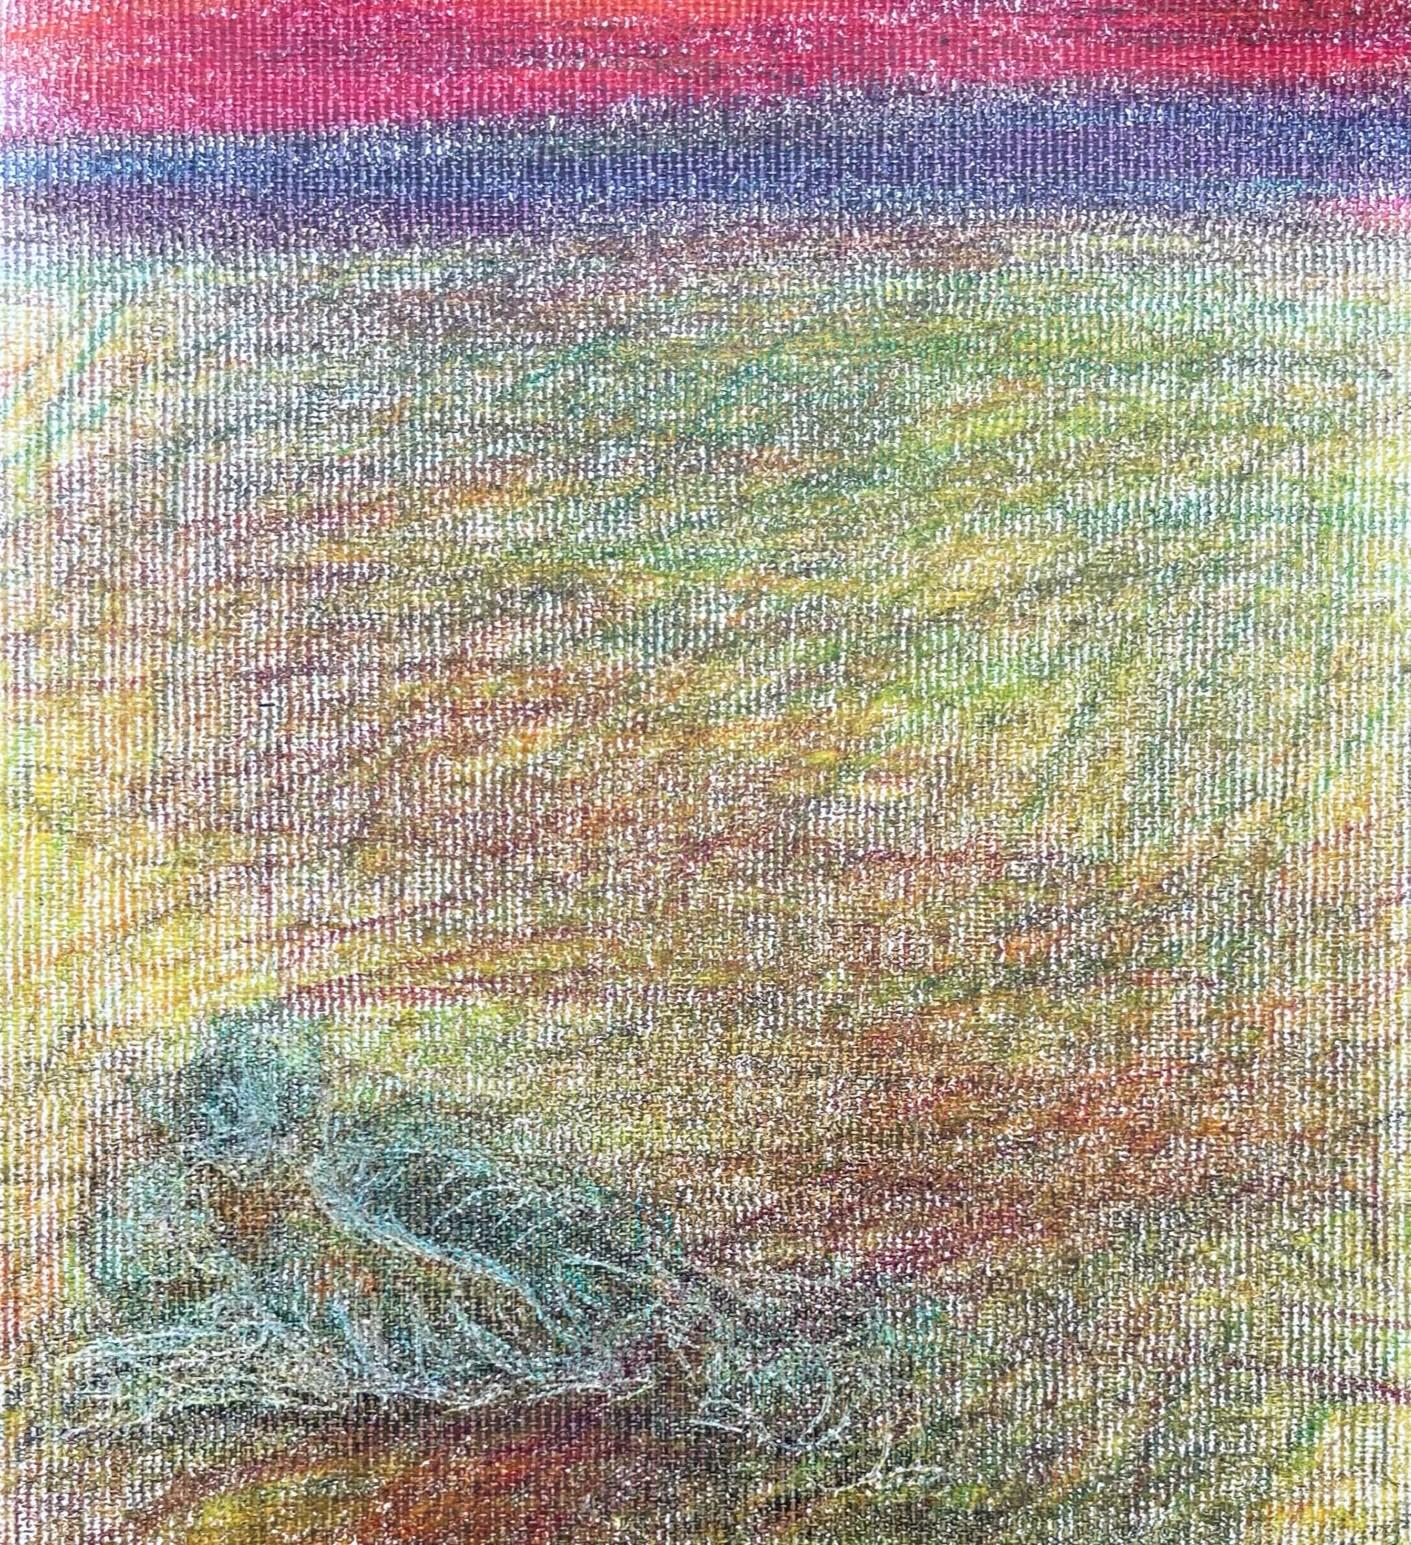 Body in the Field #11 - Landscape, Coloured Pencil, 21st Century, Red, Blue - Art by Zsolt Berszán